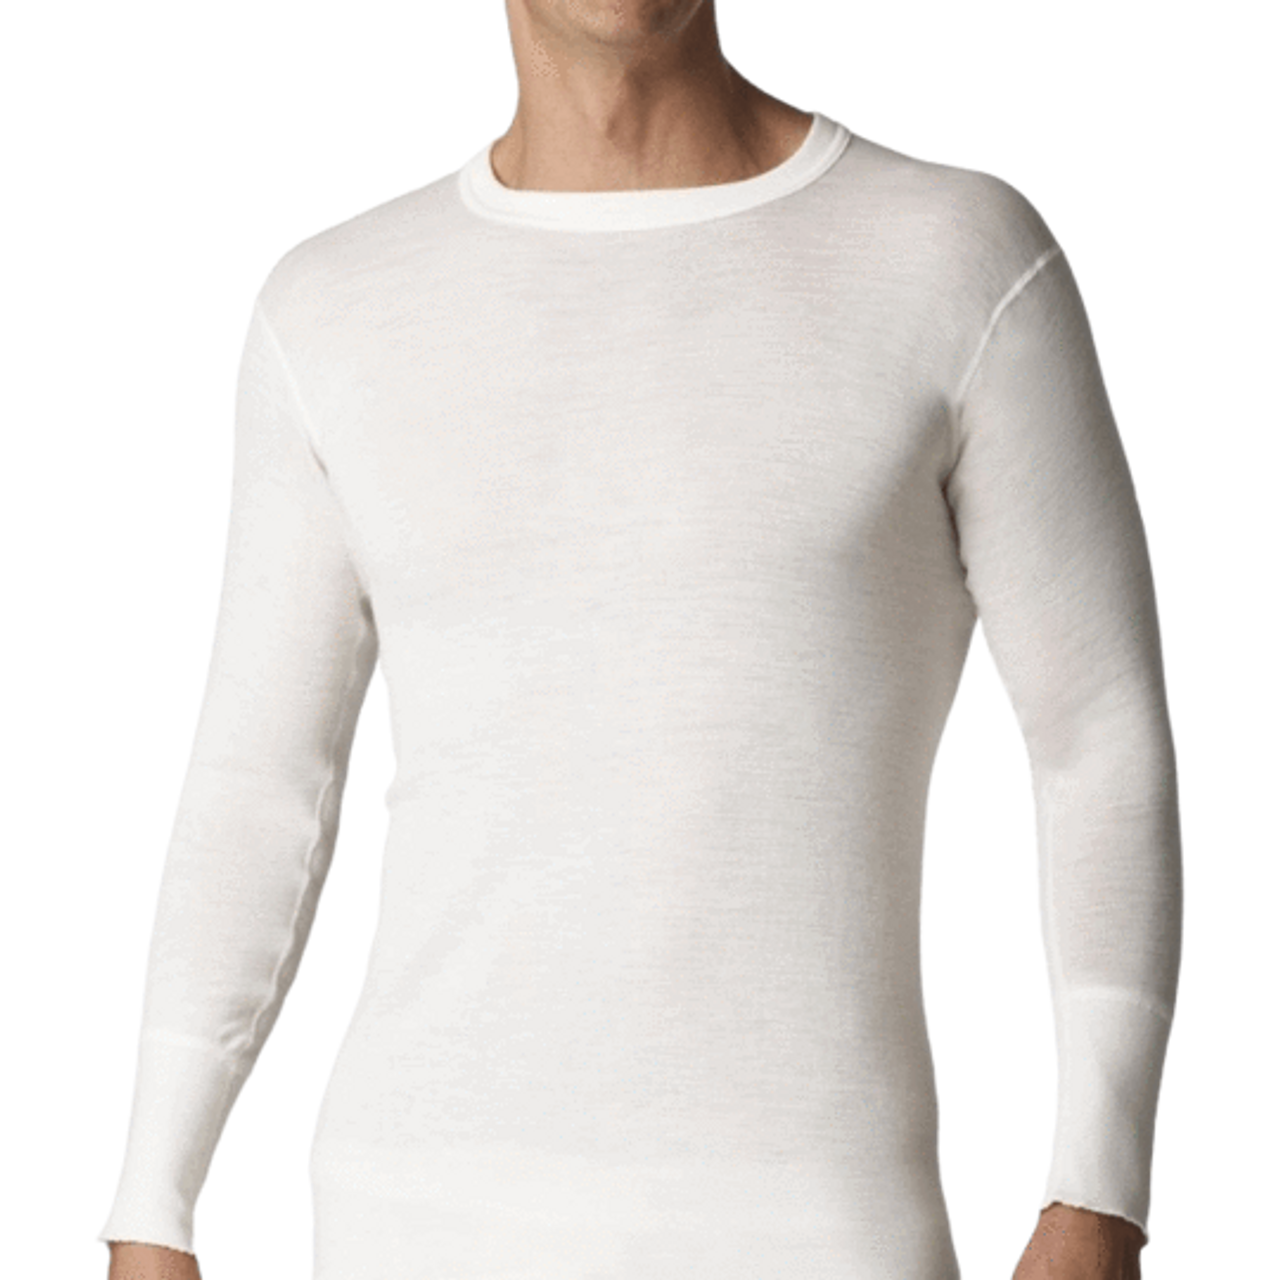 Women's Wool Long Sleeve Base Layer Chill Chasers Collection (Merino Wool)